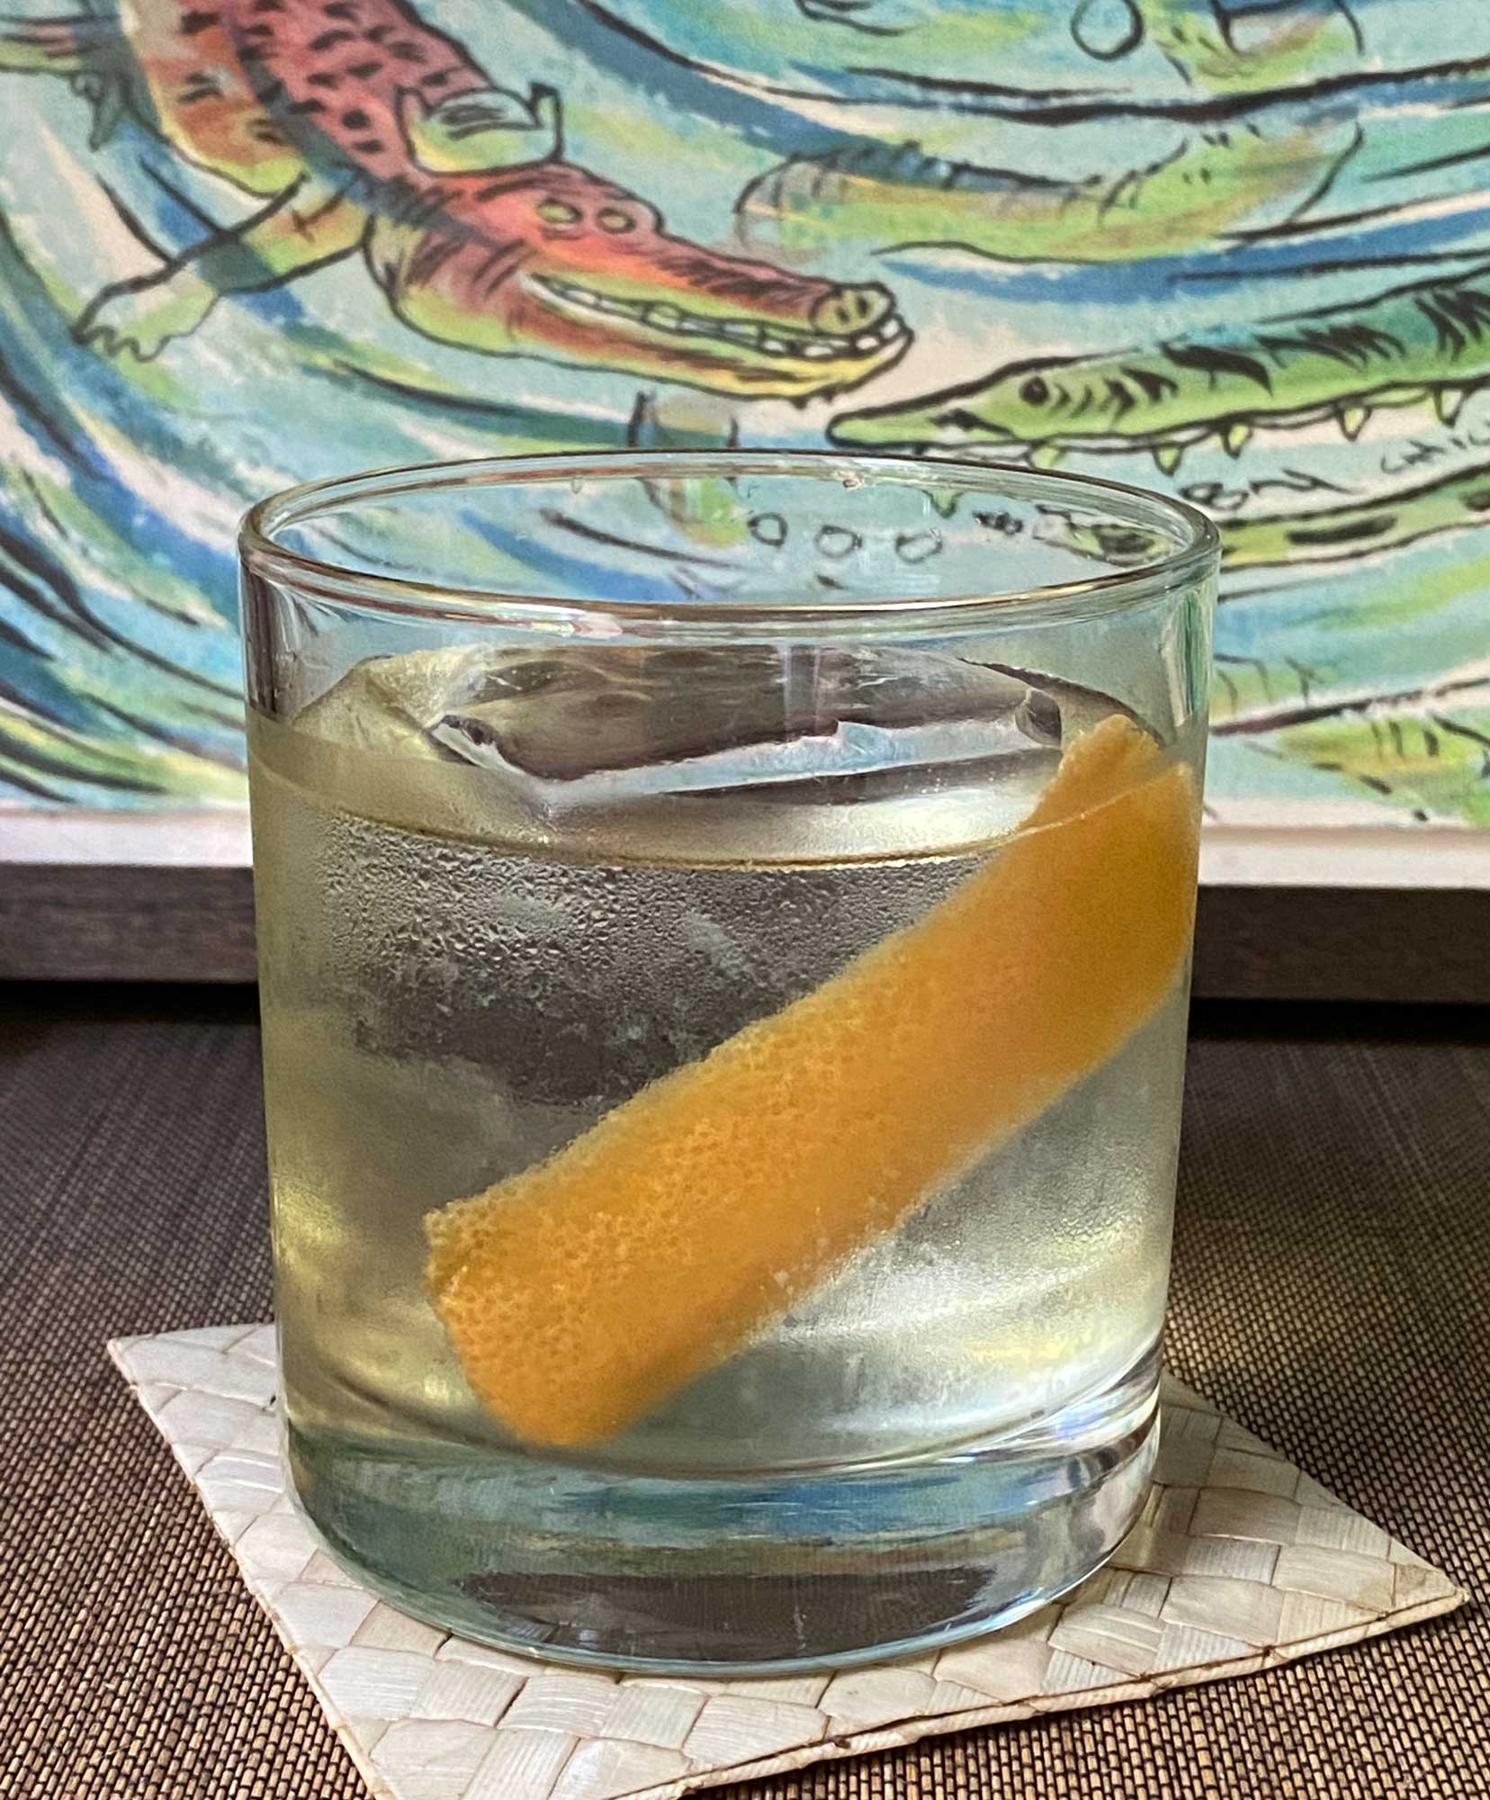 An example of the Little Valiant, the mixed drink (drink), by Will Thompson, Boston, MA, featuring Salers Gentian Apéritif, Cocchi Americano Bianco, orange bitters, lemon juice, and salt; photo by Martin Doudoroff